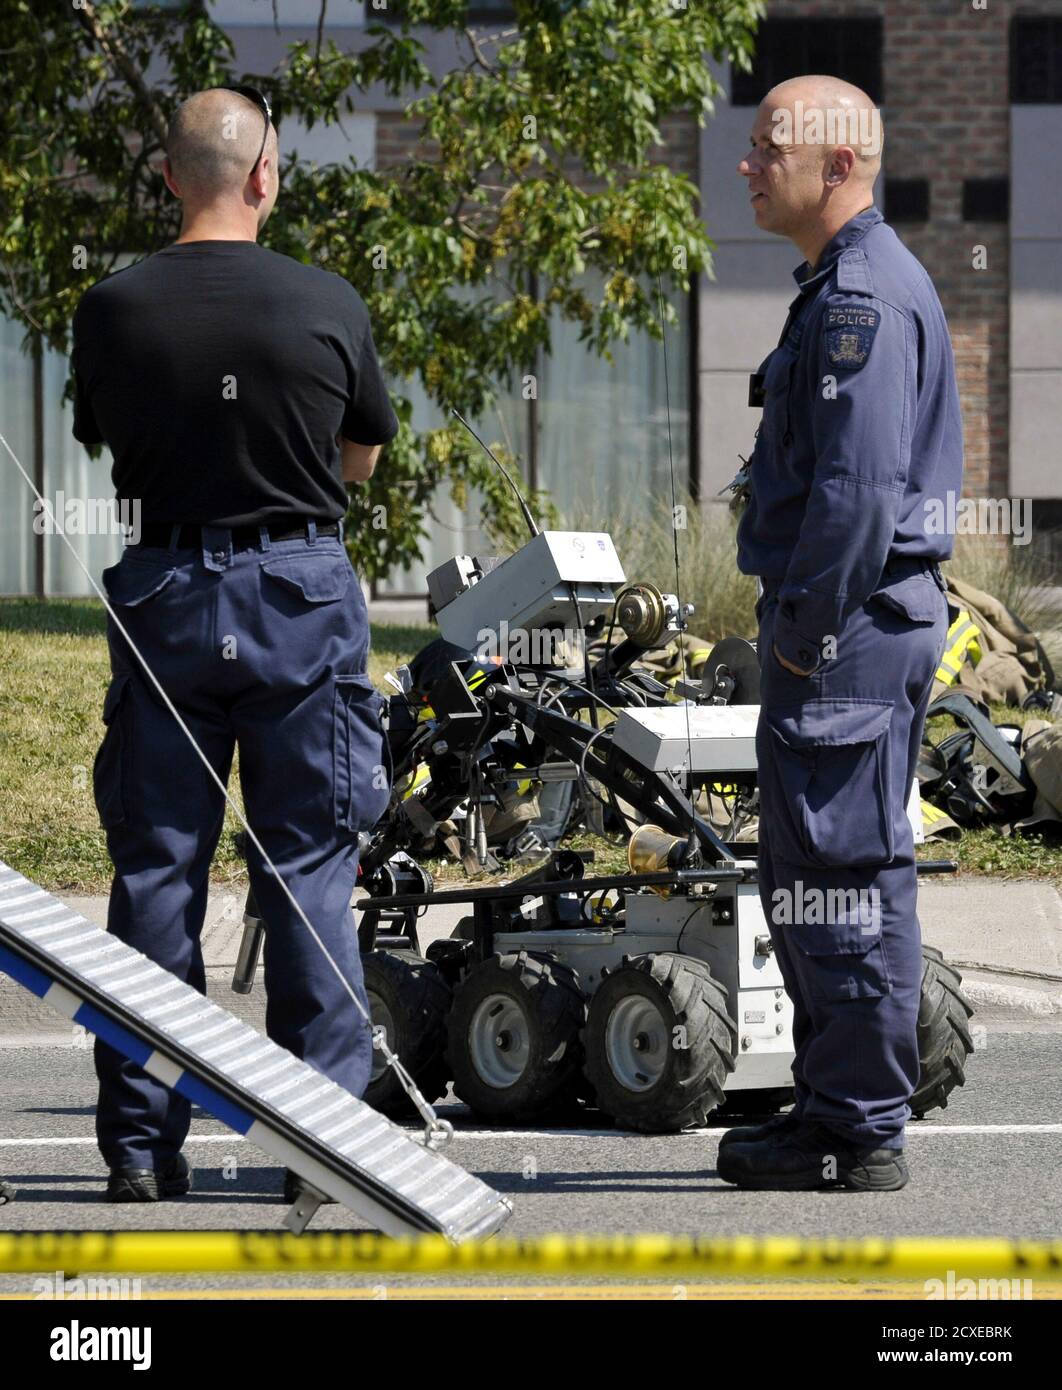 Peel Regional Police Officers deploy a robot to investigate a suspicious death, originally rumoured to be a bomb threat, at a motel in Mississauga, Ontario July 11, 2012.  REUTERS/J.P. Moczulski  (CANADA - Tags: SOCIETY CRIME LAW) Stock Photo